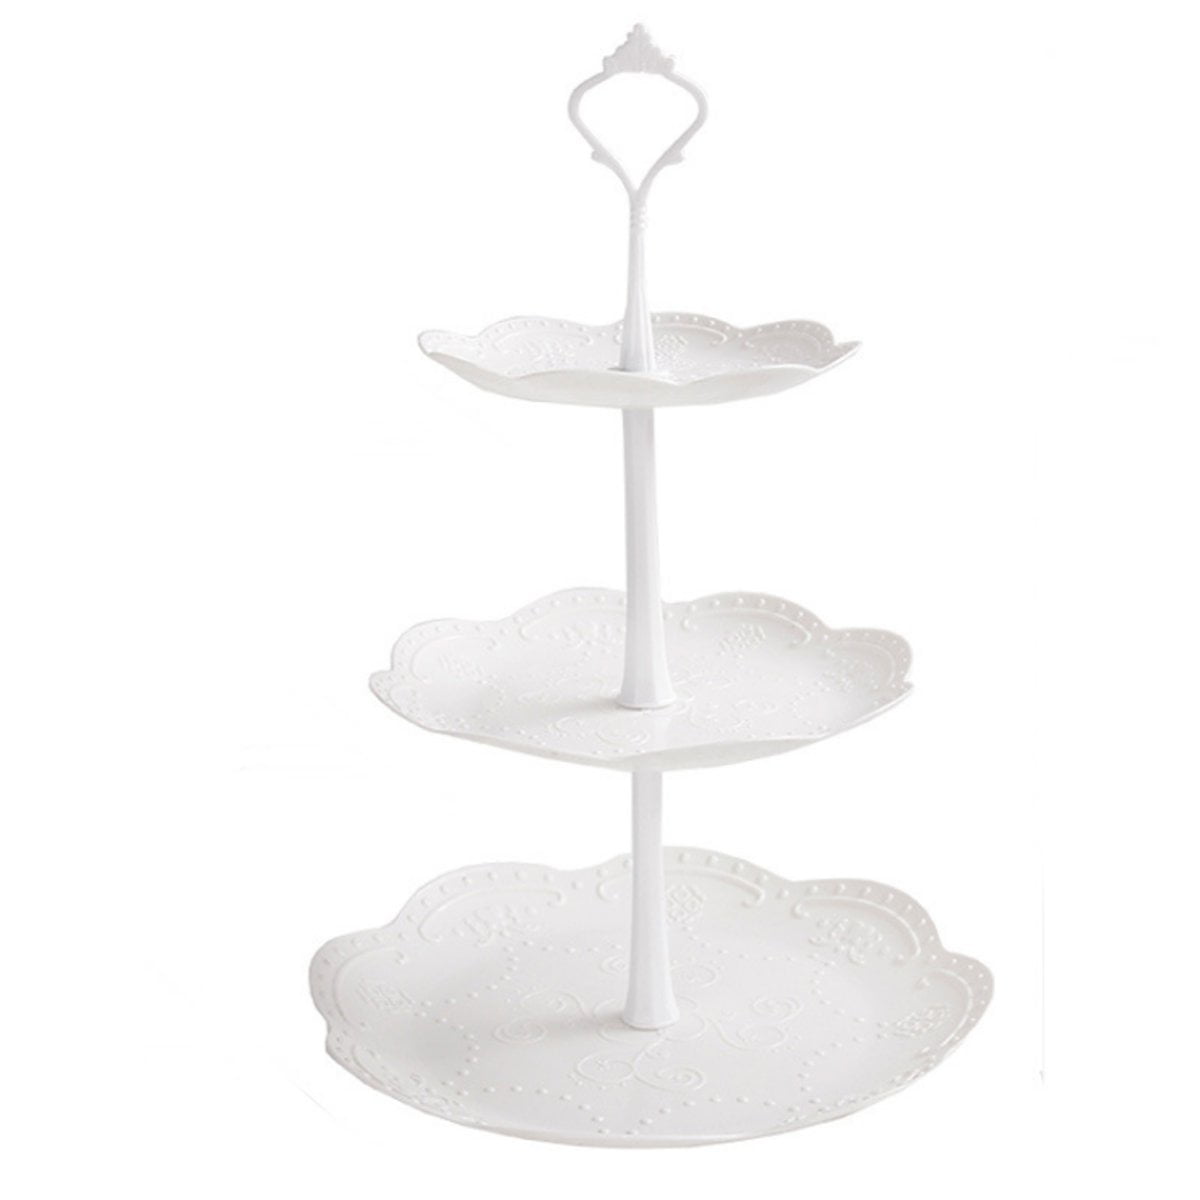 Round Cake Stand Display Fruit Plate Plastic Dessert Stand Jinlaili 3 Tiers White Cake Display Stand Cupcake Stand Party Serving Platter Stand for Birthday Weeding Party 